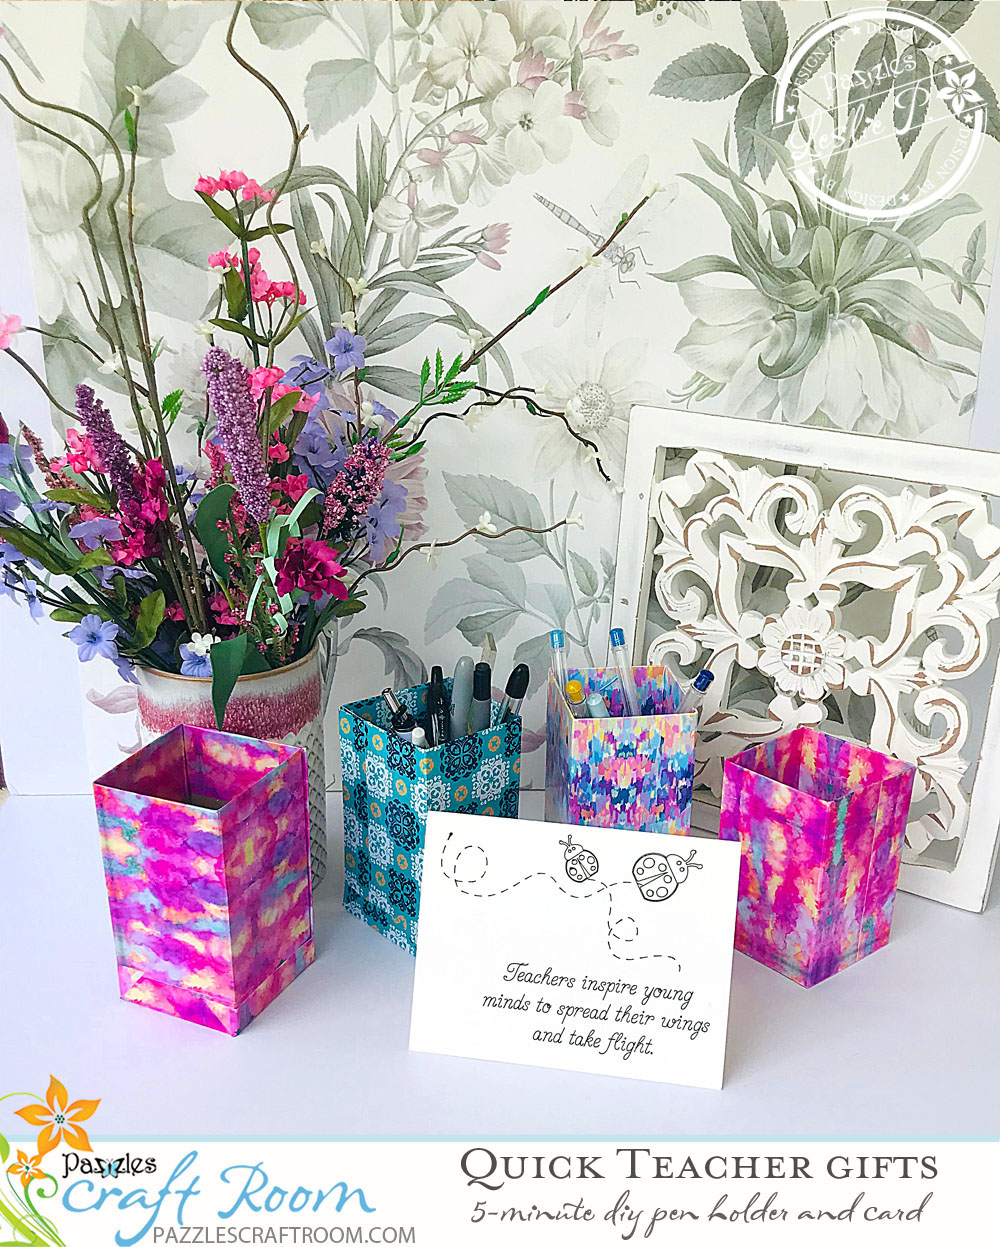 Pazzles DIY Easy and Quick Teacher Gifts by Leslie Peppers